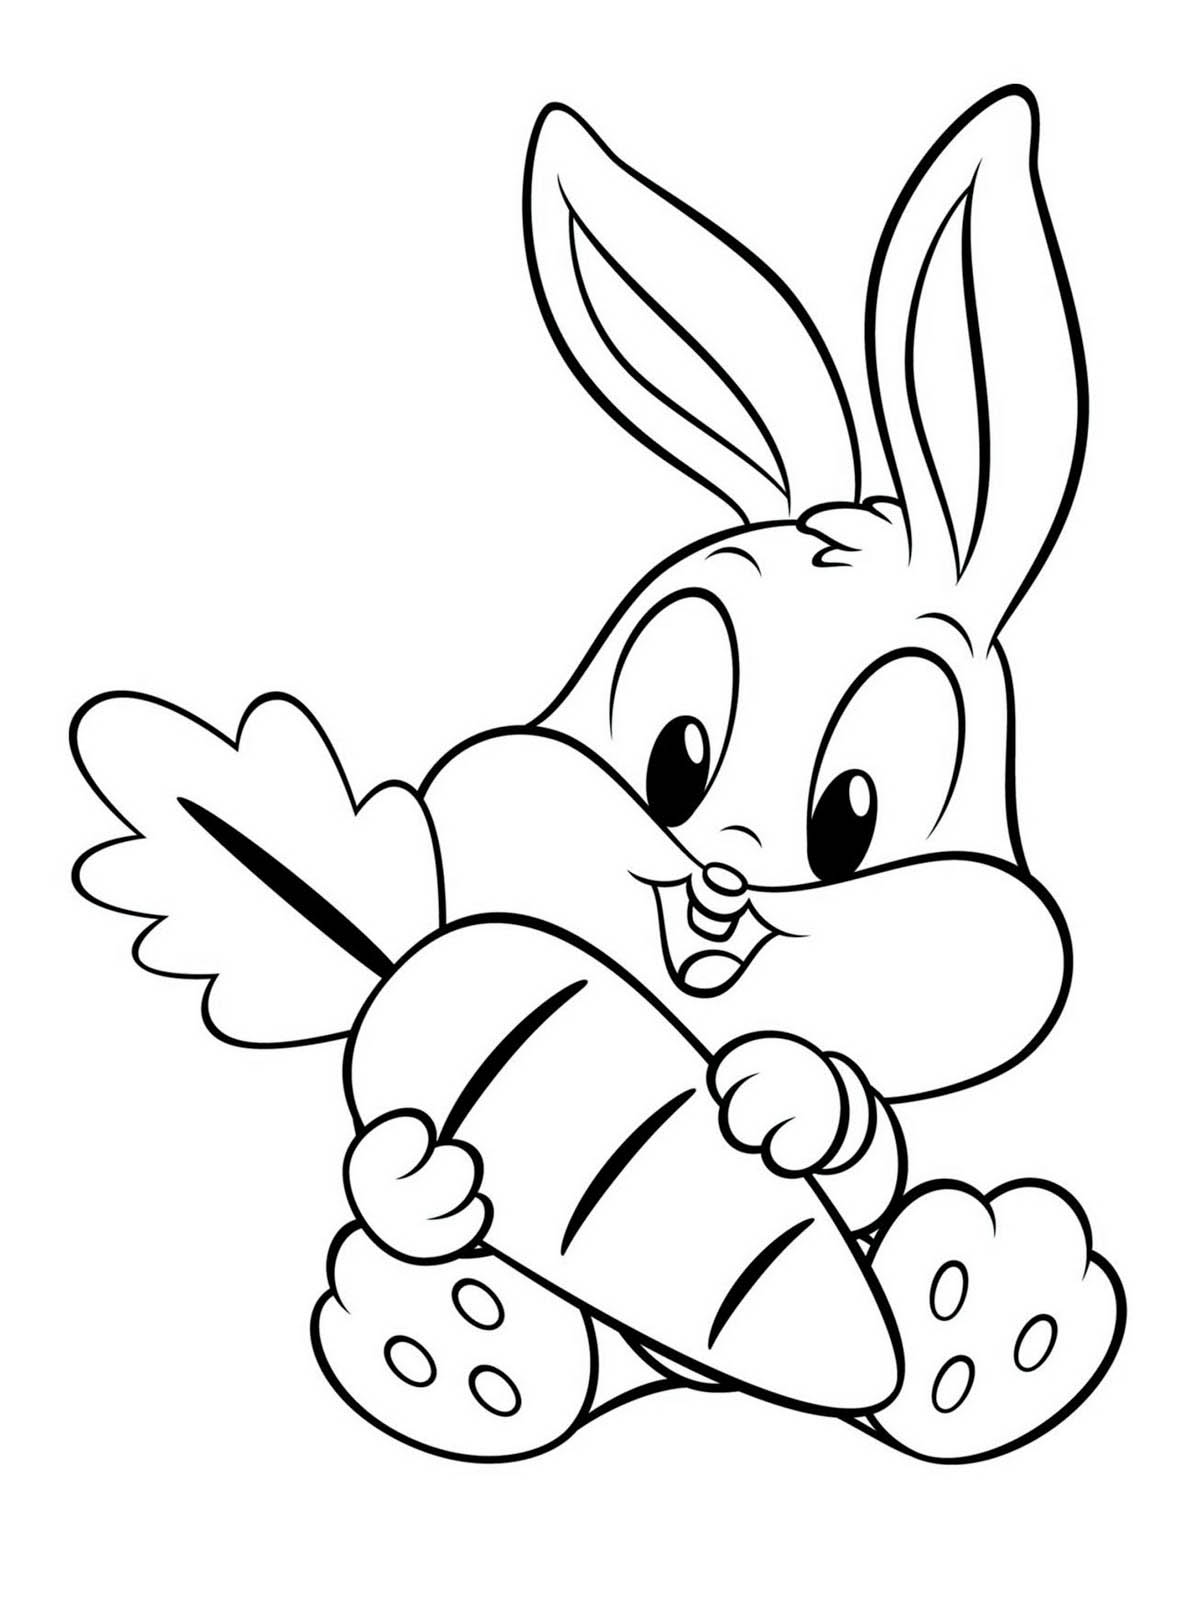 rabbit-coloring-pages-coloringnori-coloring-pages-for-kids